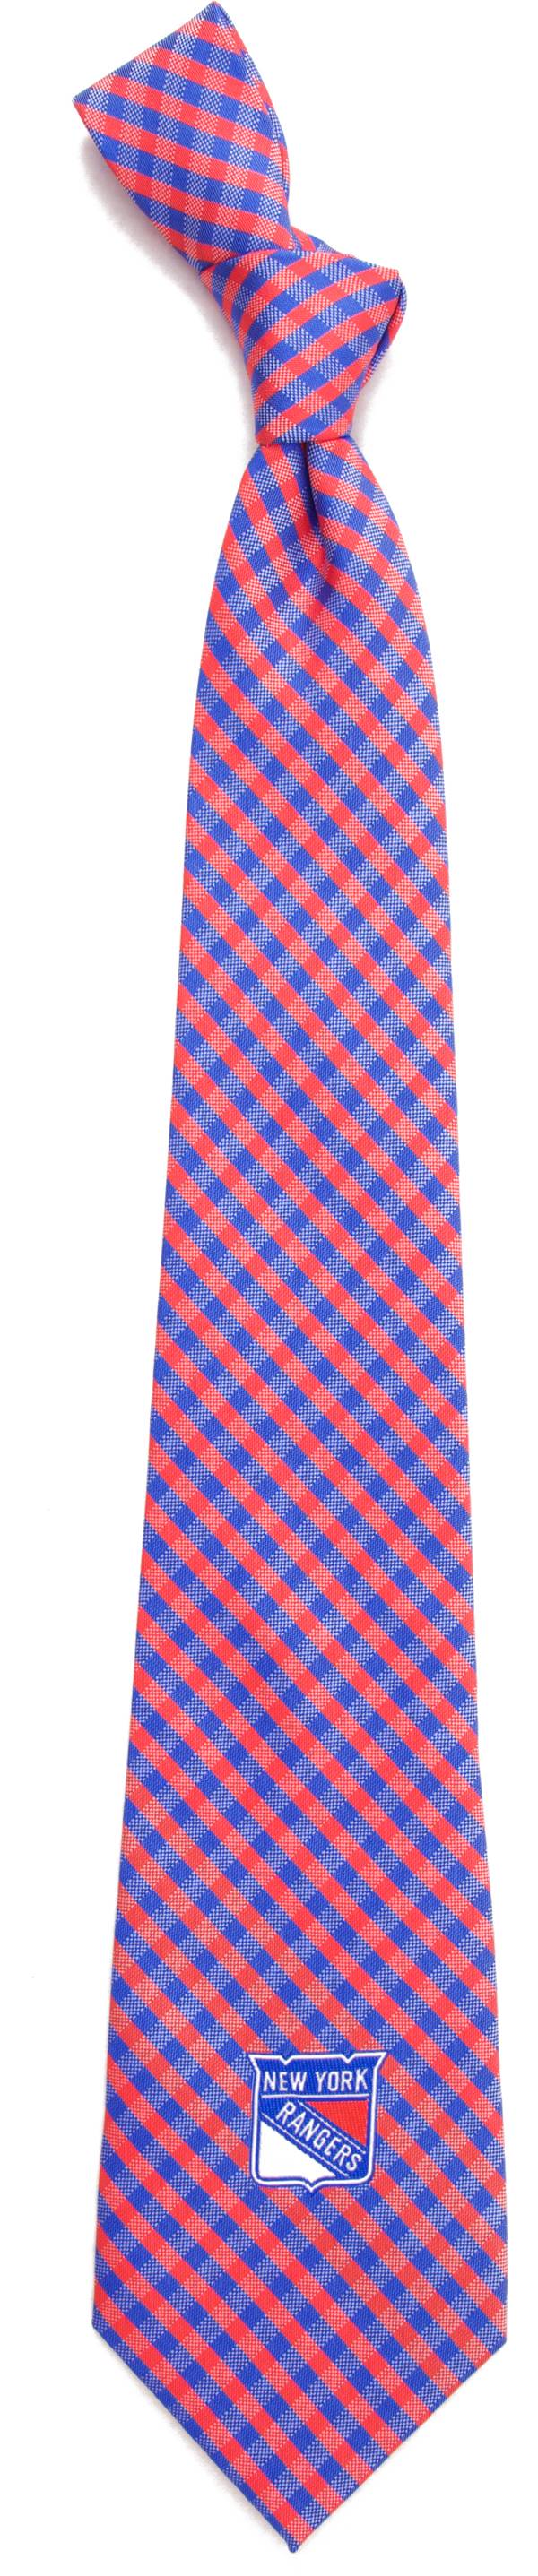 Eagles Wings Texas Rangers Gingham Necktie product image